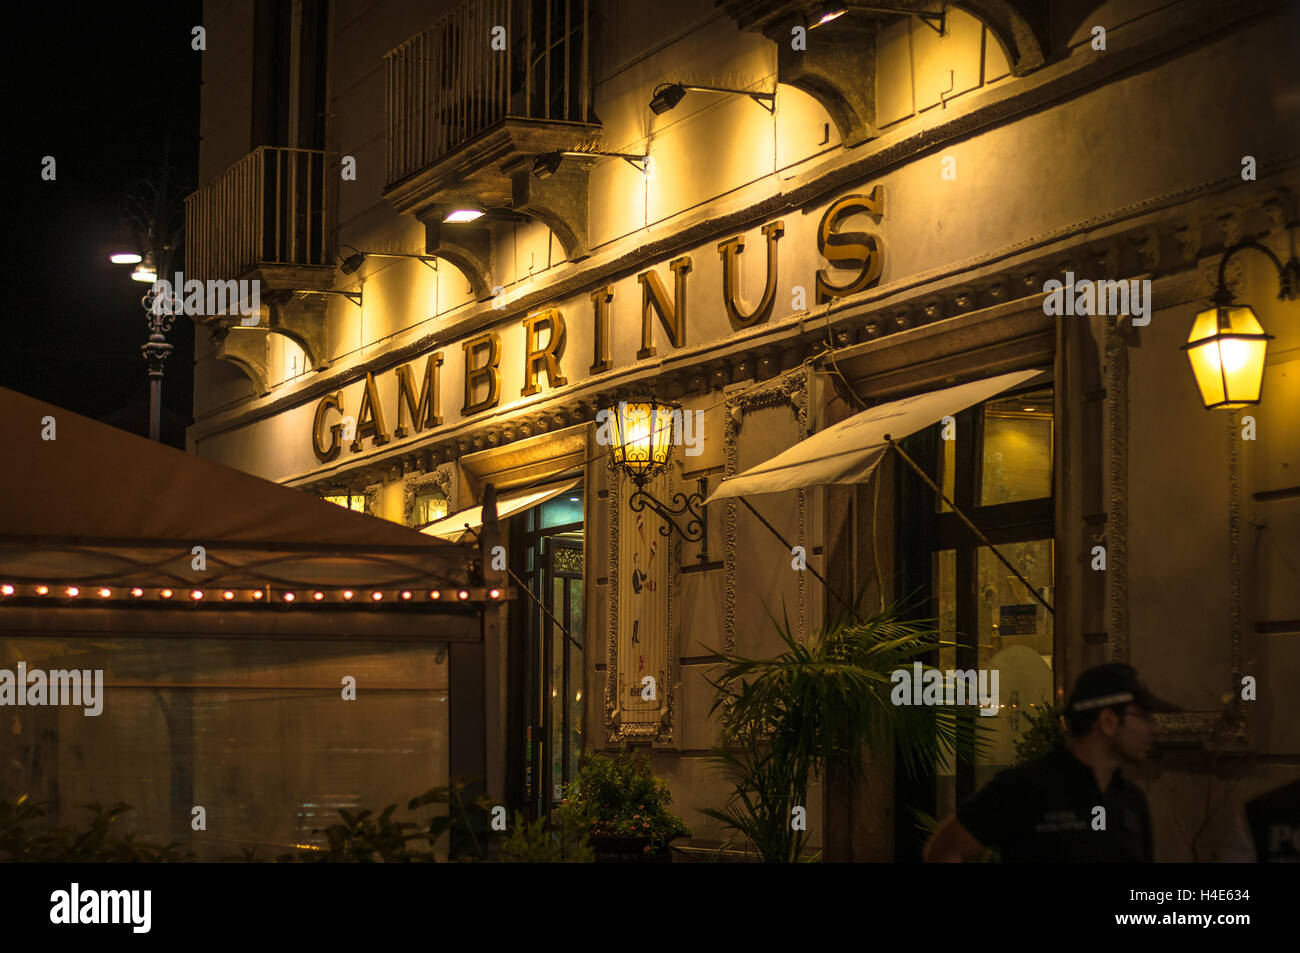 The Facade of Caffe Gambrinus at night. Caffe Gambrinus is a Neapolitan cafe dating back to 1860. Stock Photo